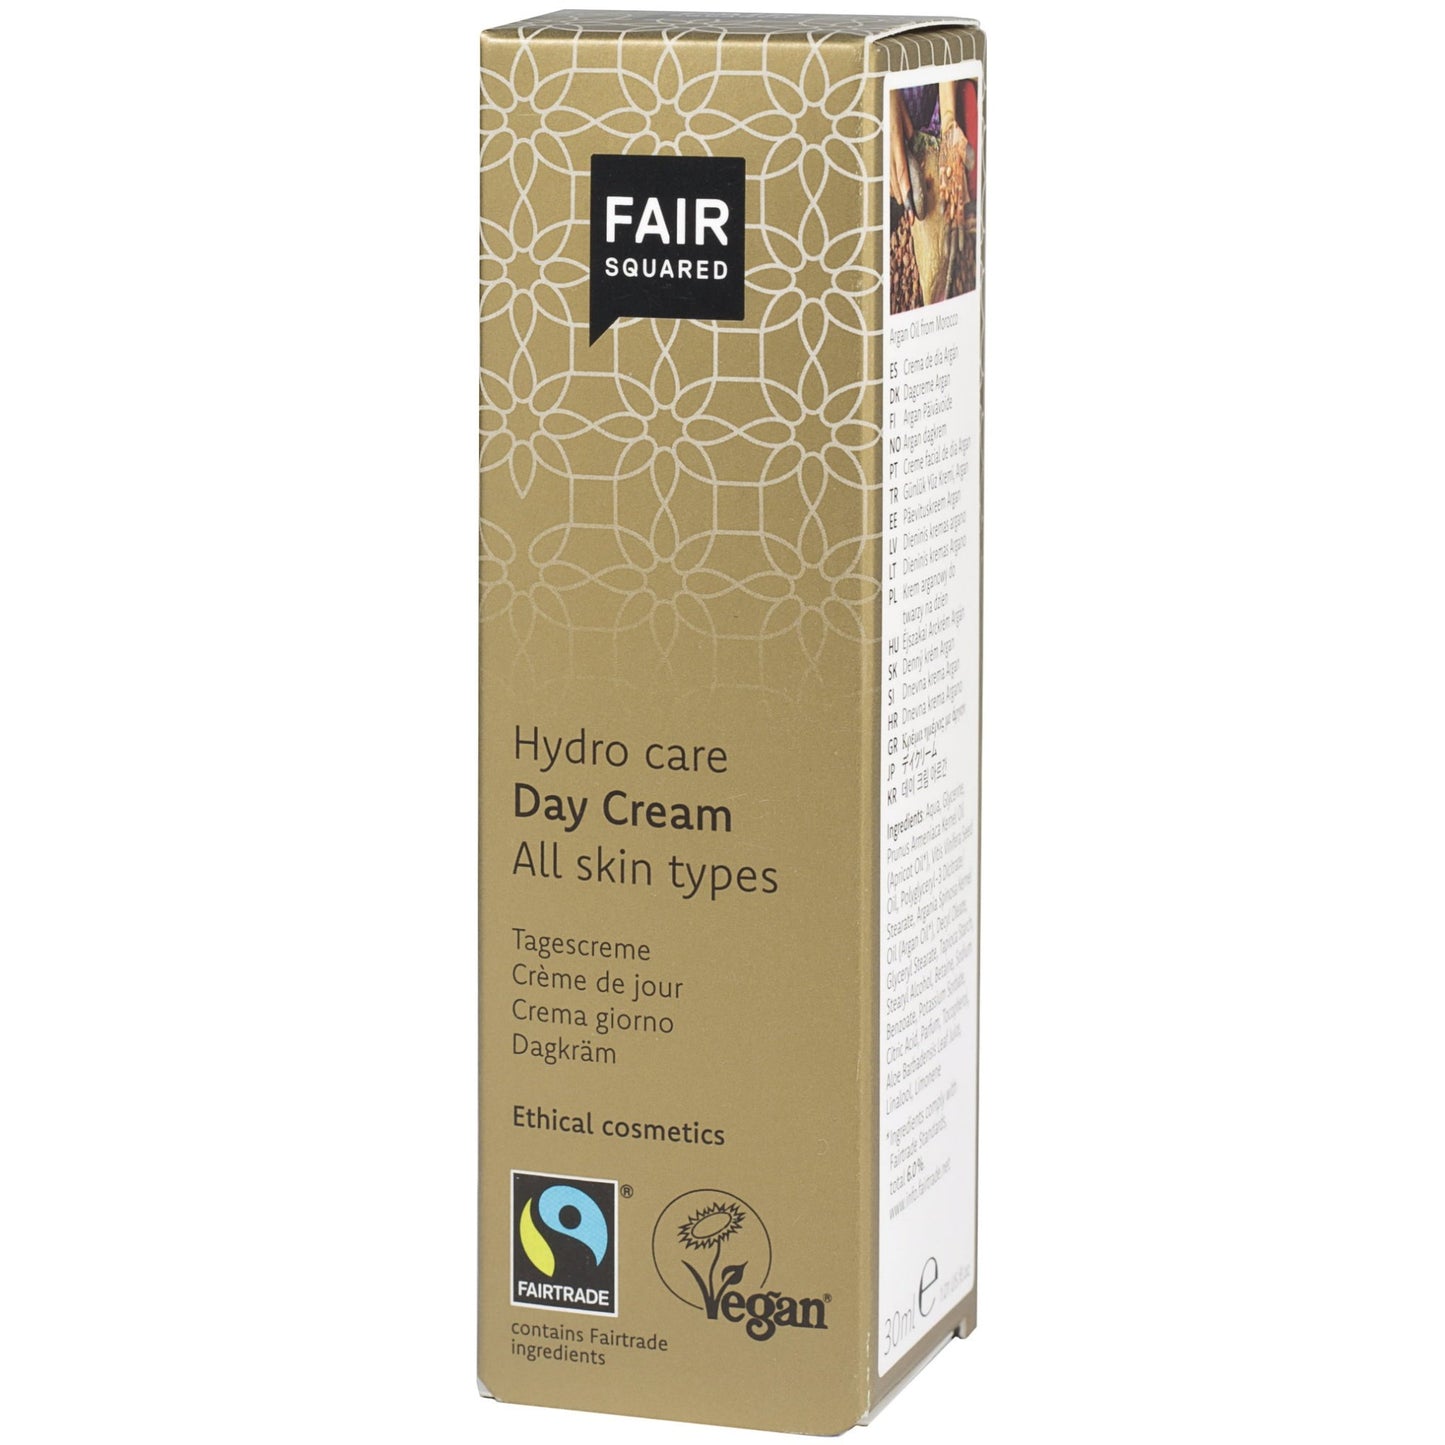 FAIR SQUARED Hydro Care Day Cream | Fairtrade Vegan Natural Halal | Box | BeoVERDE.ie